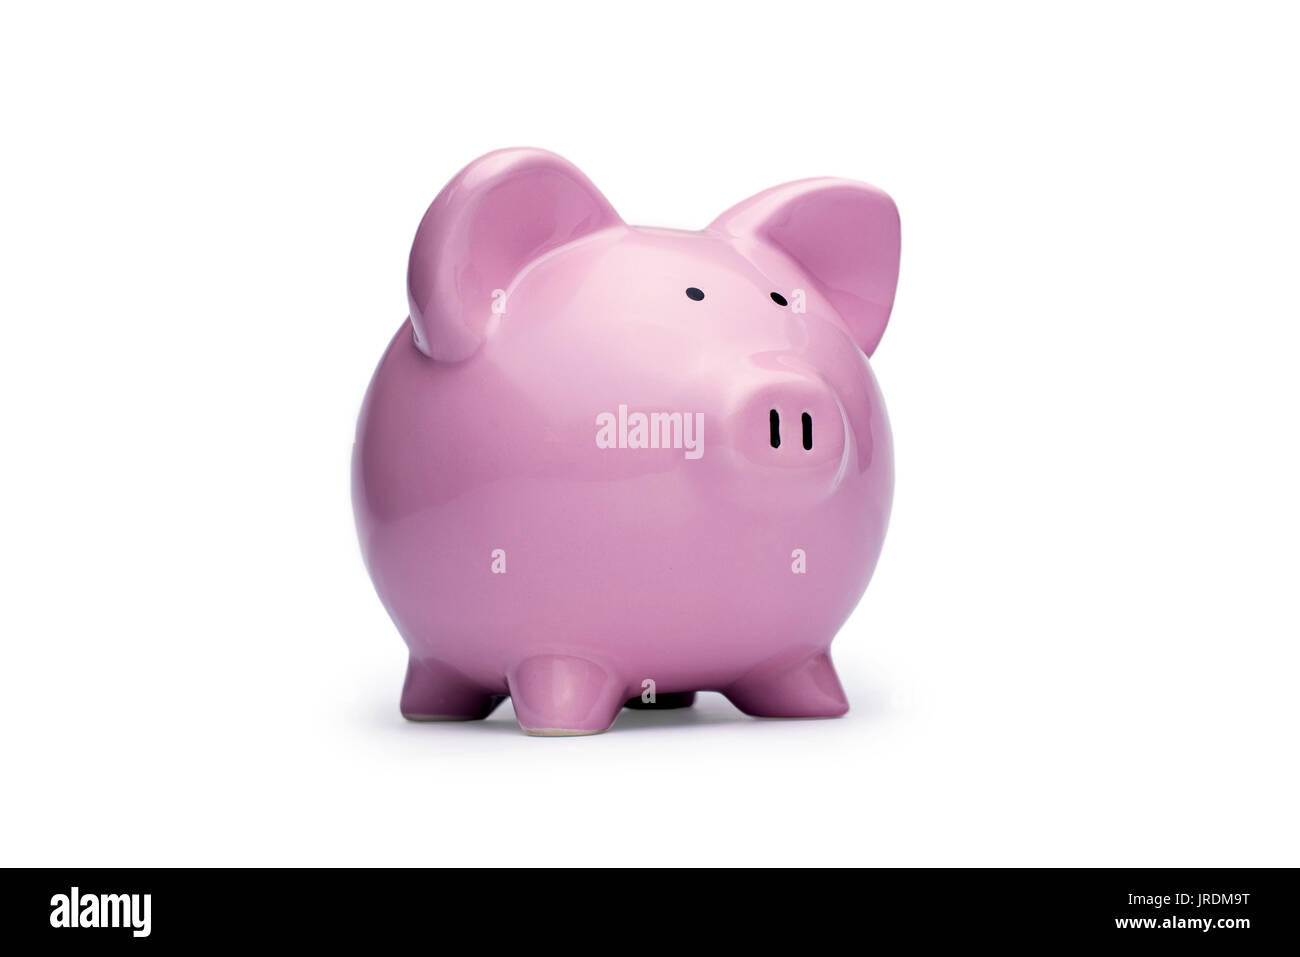 Little ceramic pink piggy bank or moneybox on a white background conceptual of saving money, finances, investment, security and goals Stock Photo